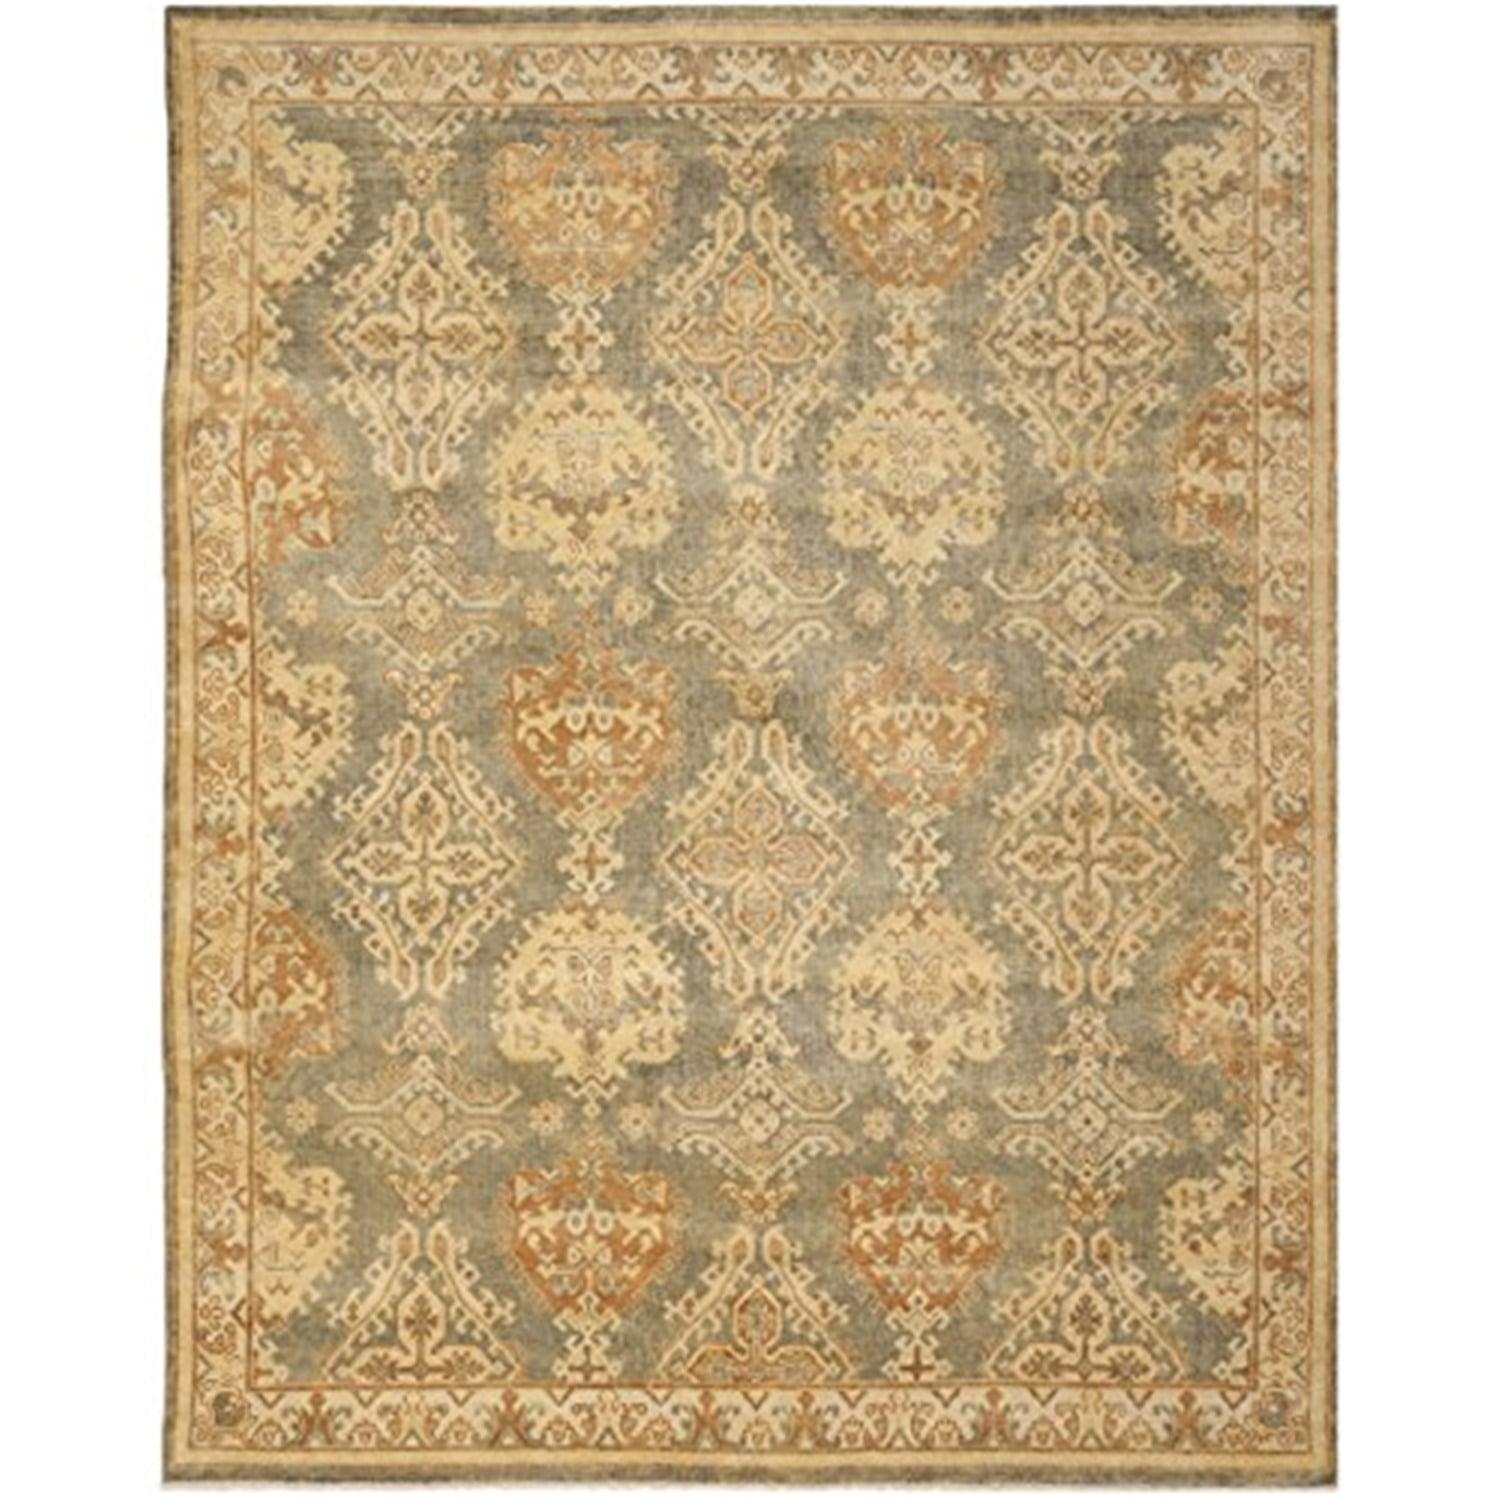 Elegant Hand-Knotted Woolen Area Rug, 9' x 12', Soft Gray